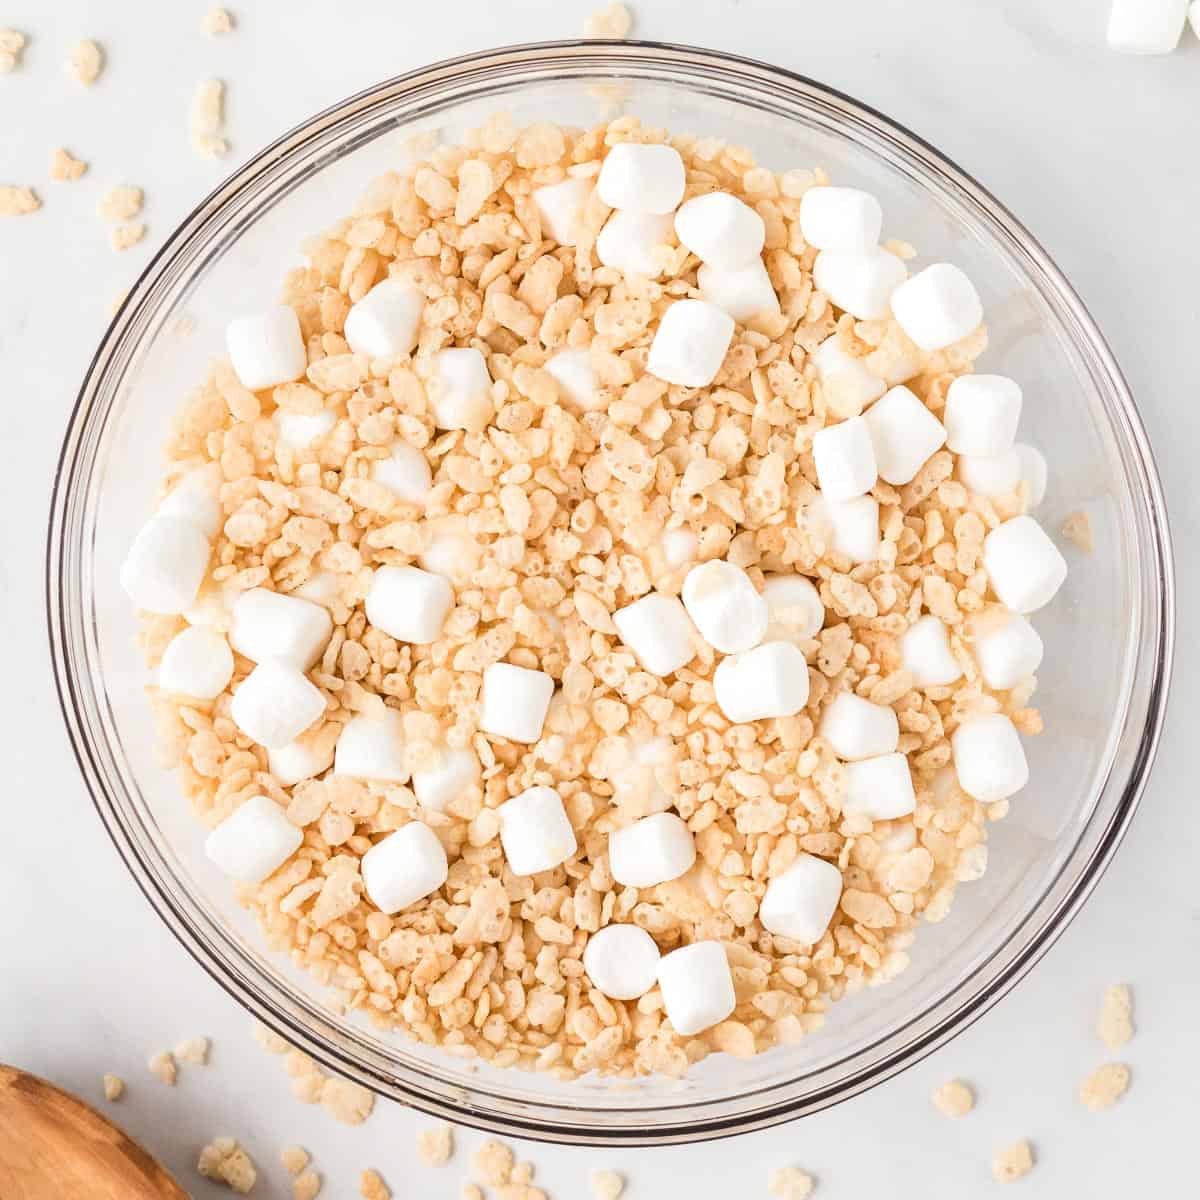 mini marshmallows and rice krispies mixed together in a bowl